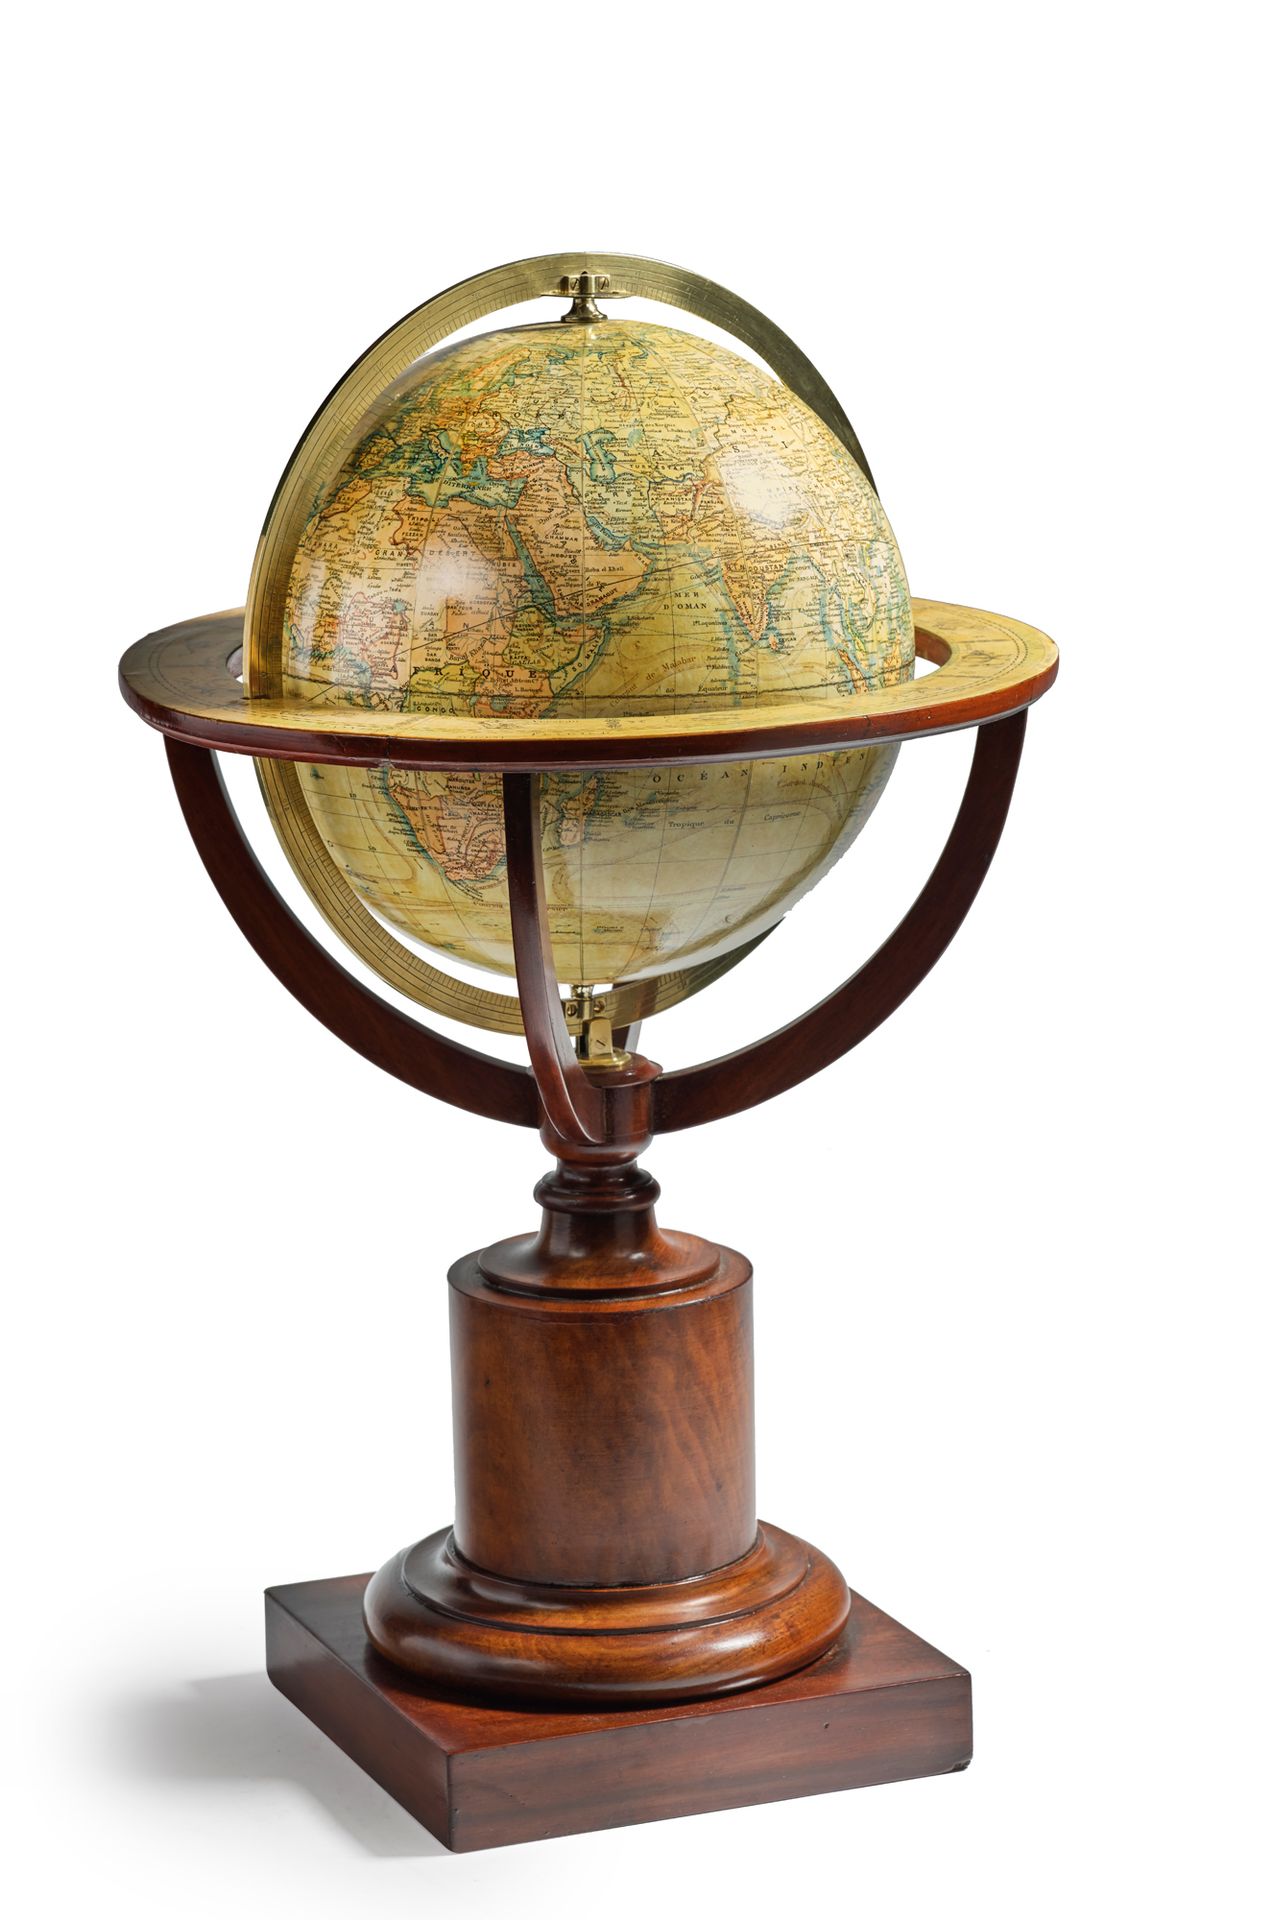 Null Library globe
Graduated brass meridian circle. Foot in turned mahogany. The&hellip;